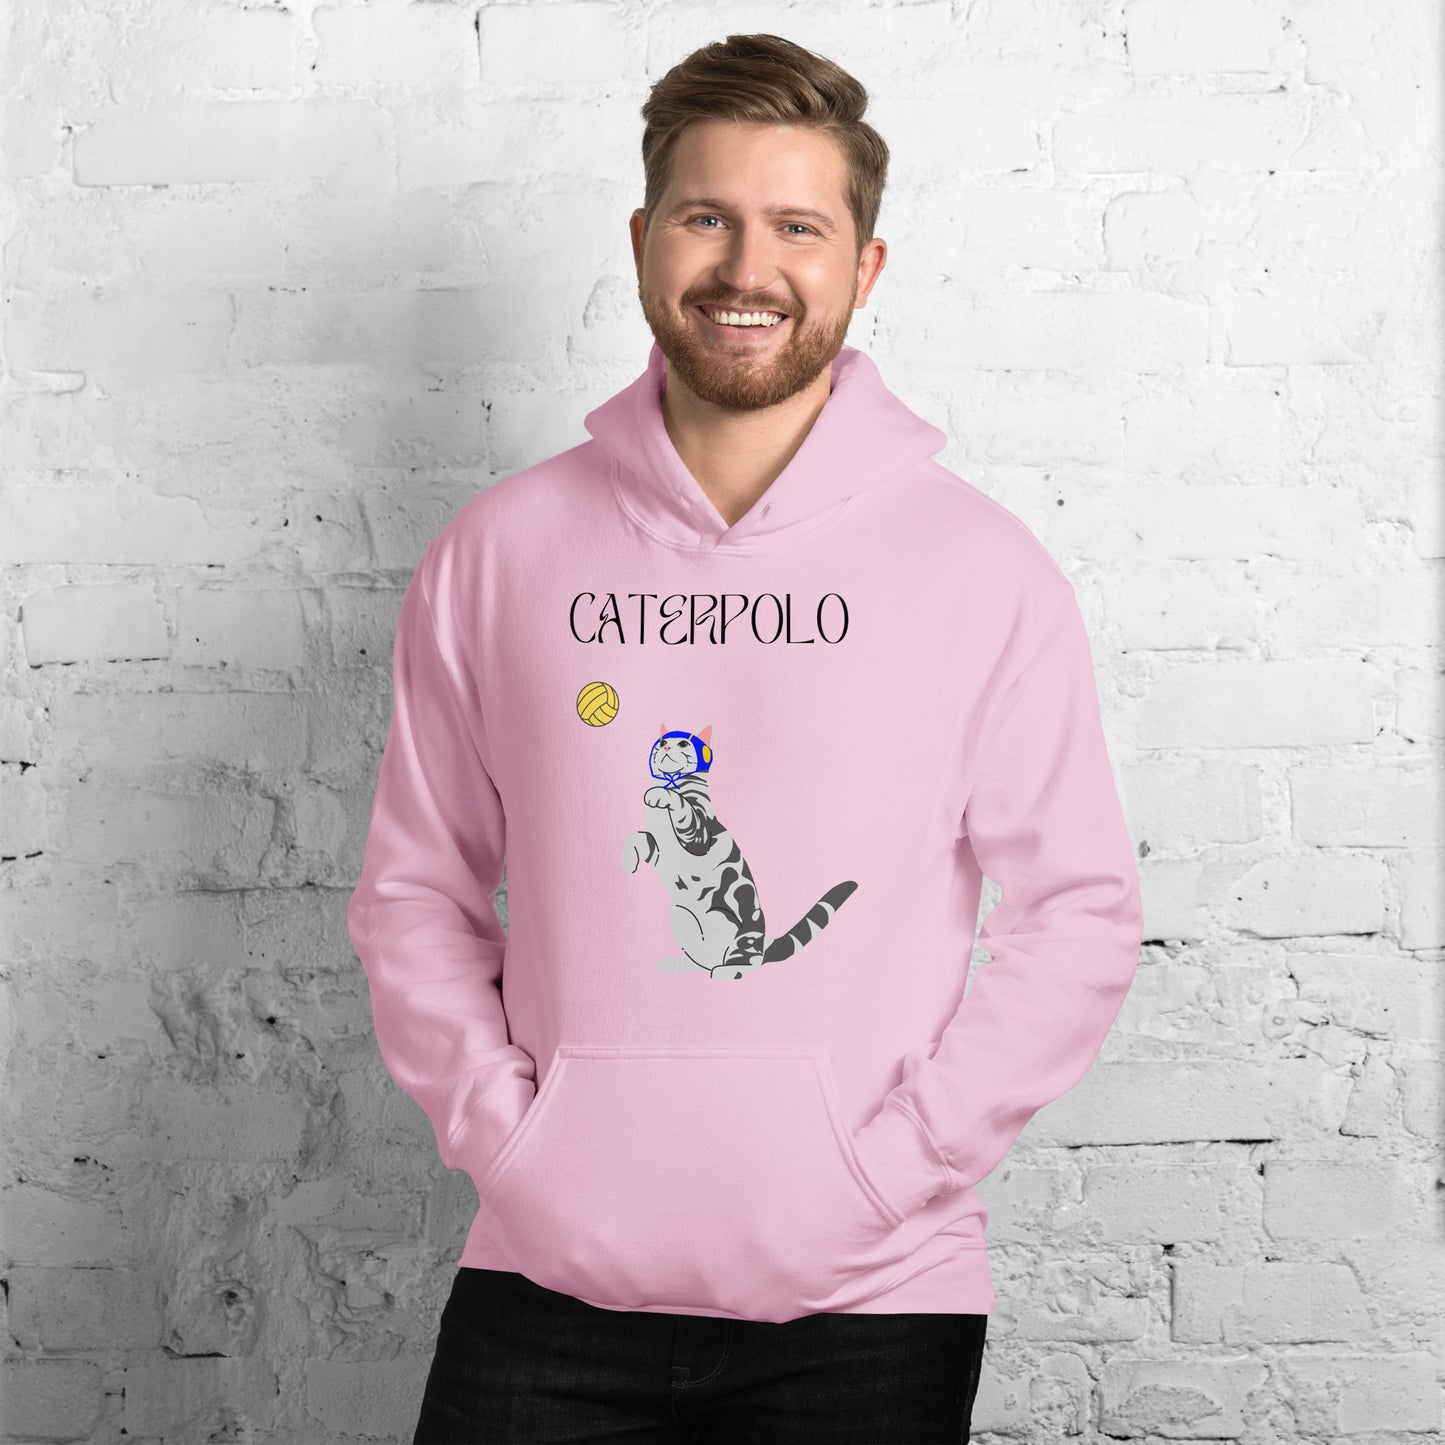 Caterpolo, if cats played waterpolo  - Unisex Heavy Blend Hoodie - Gildan 18500